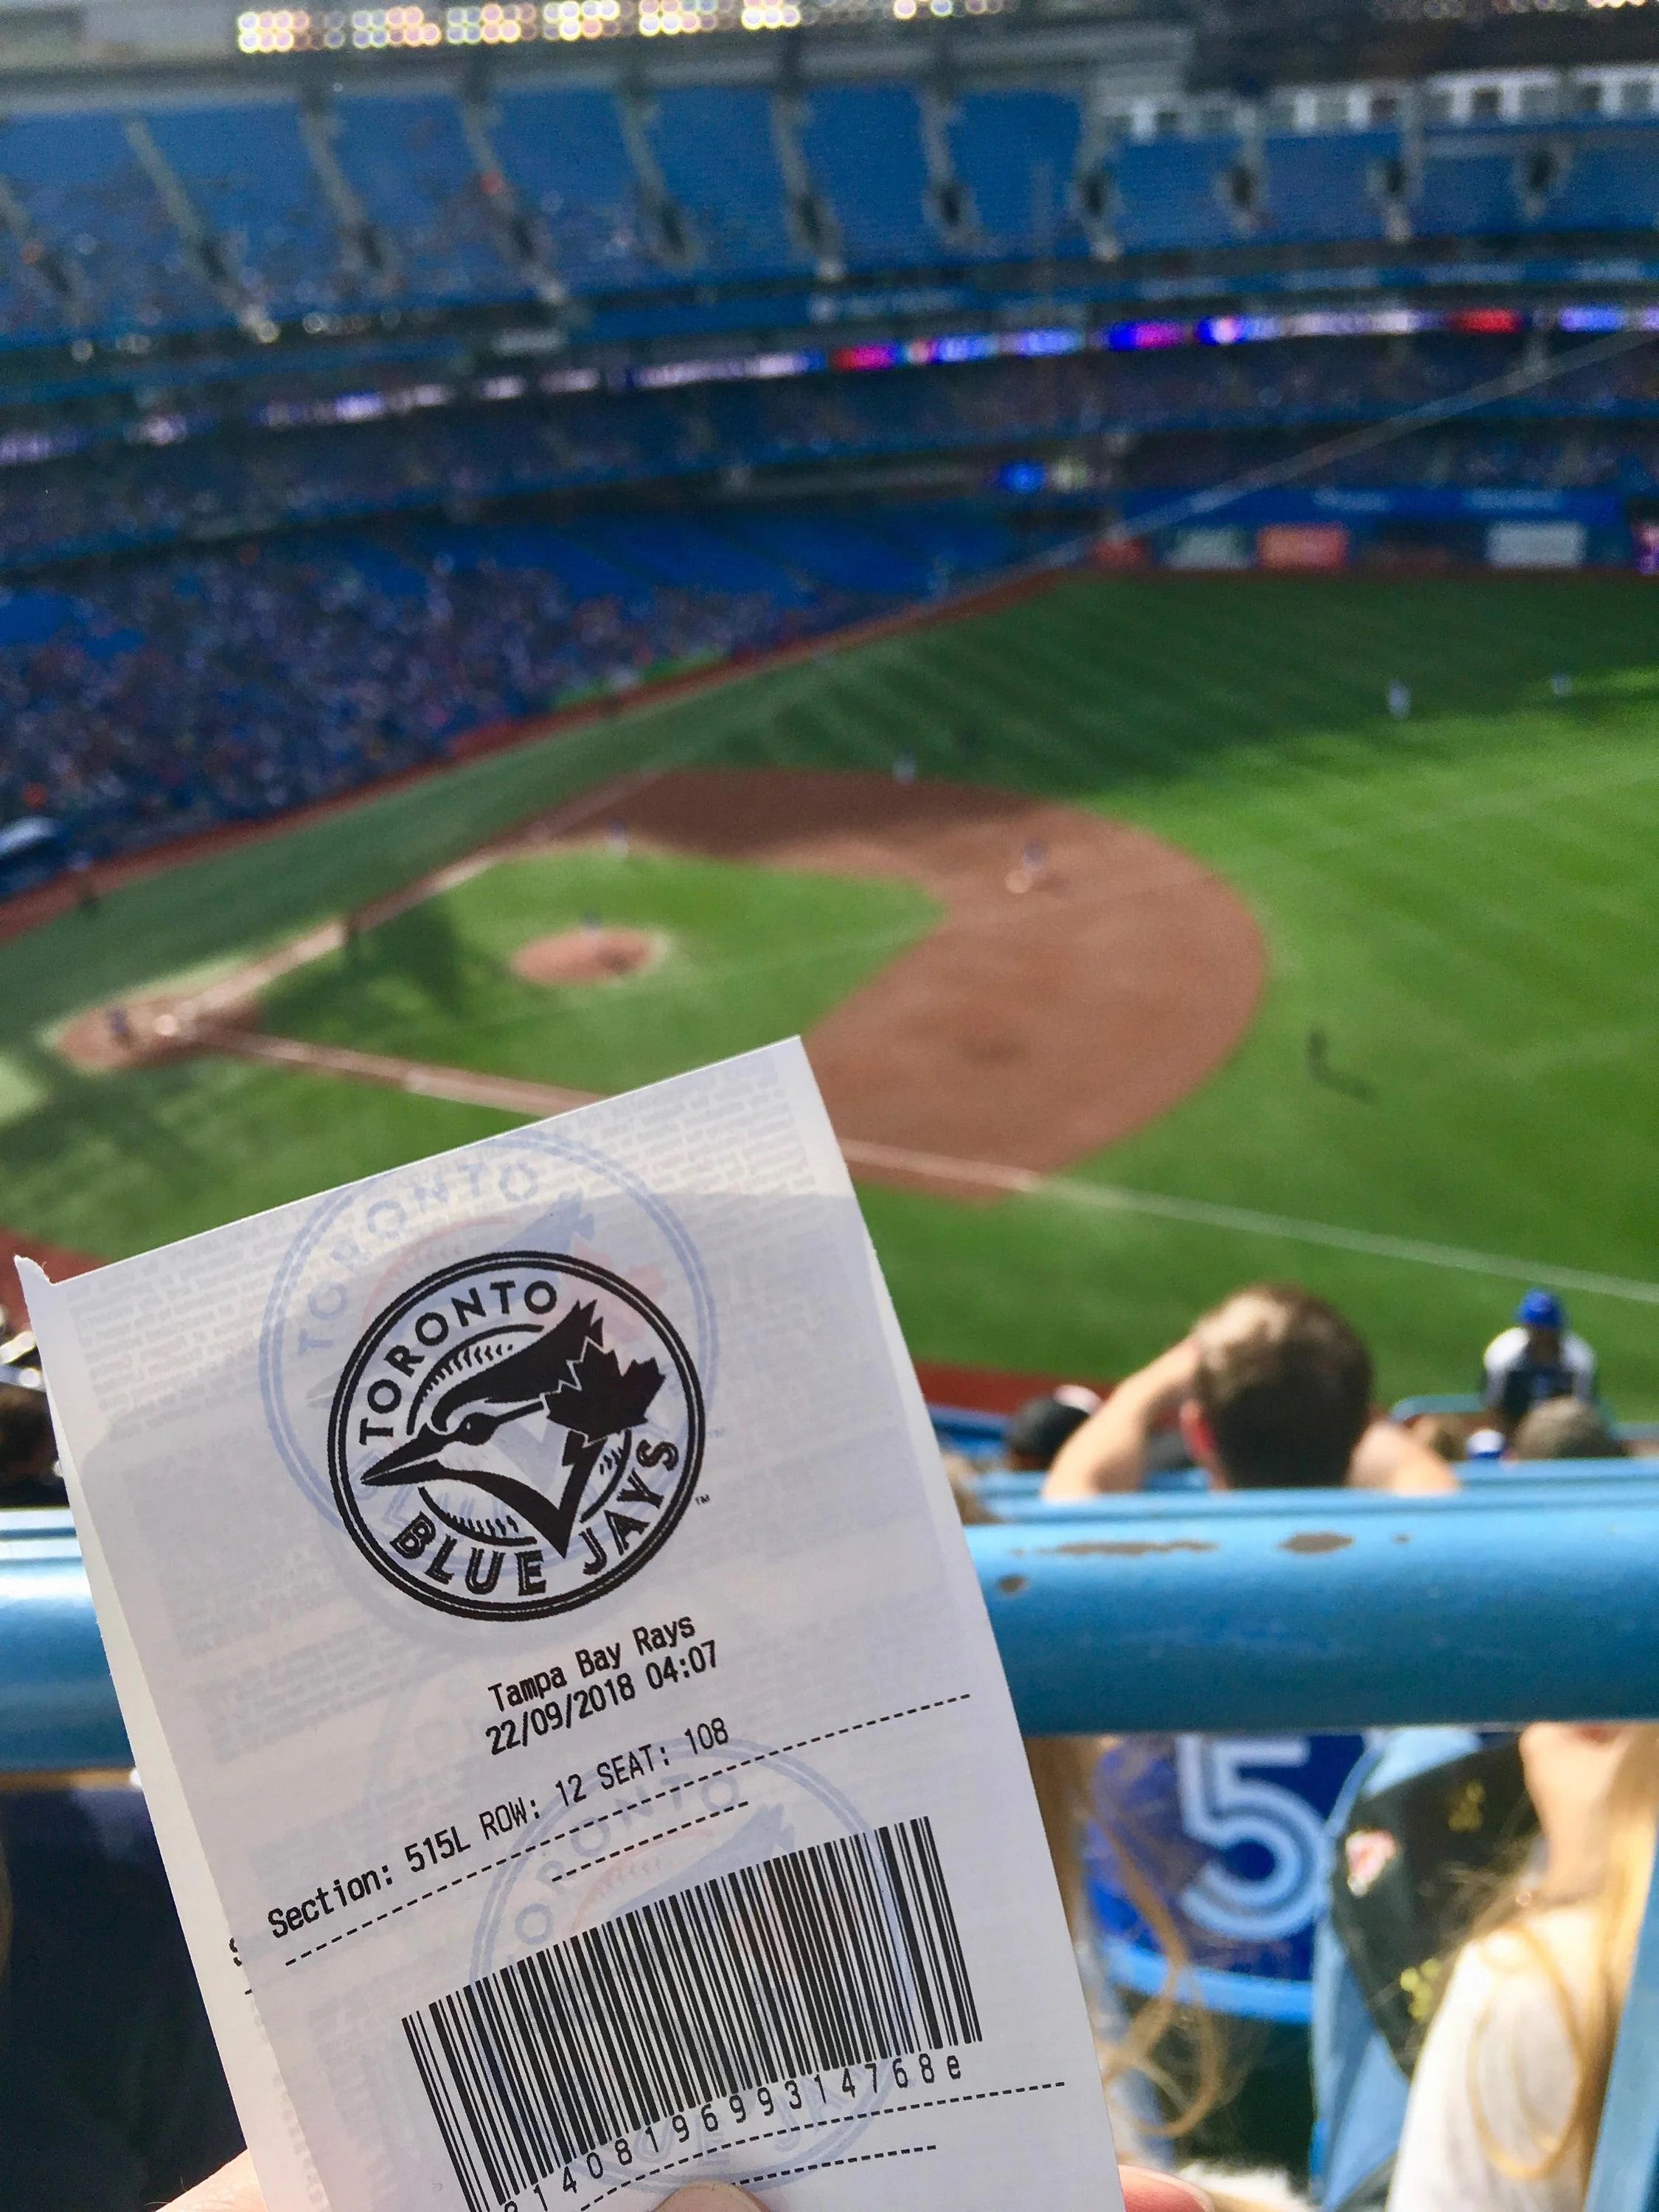 Blue Jay's game ticket in front of the diamond at Roger's Centre.